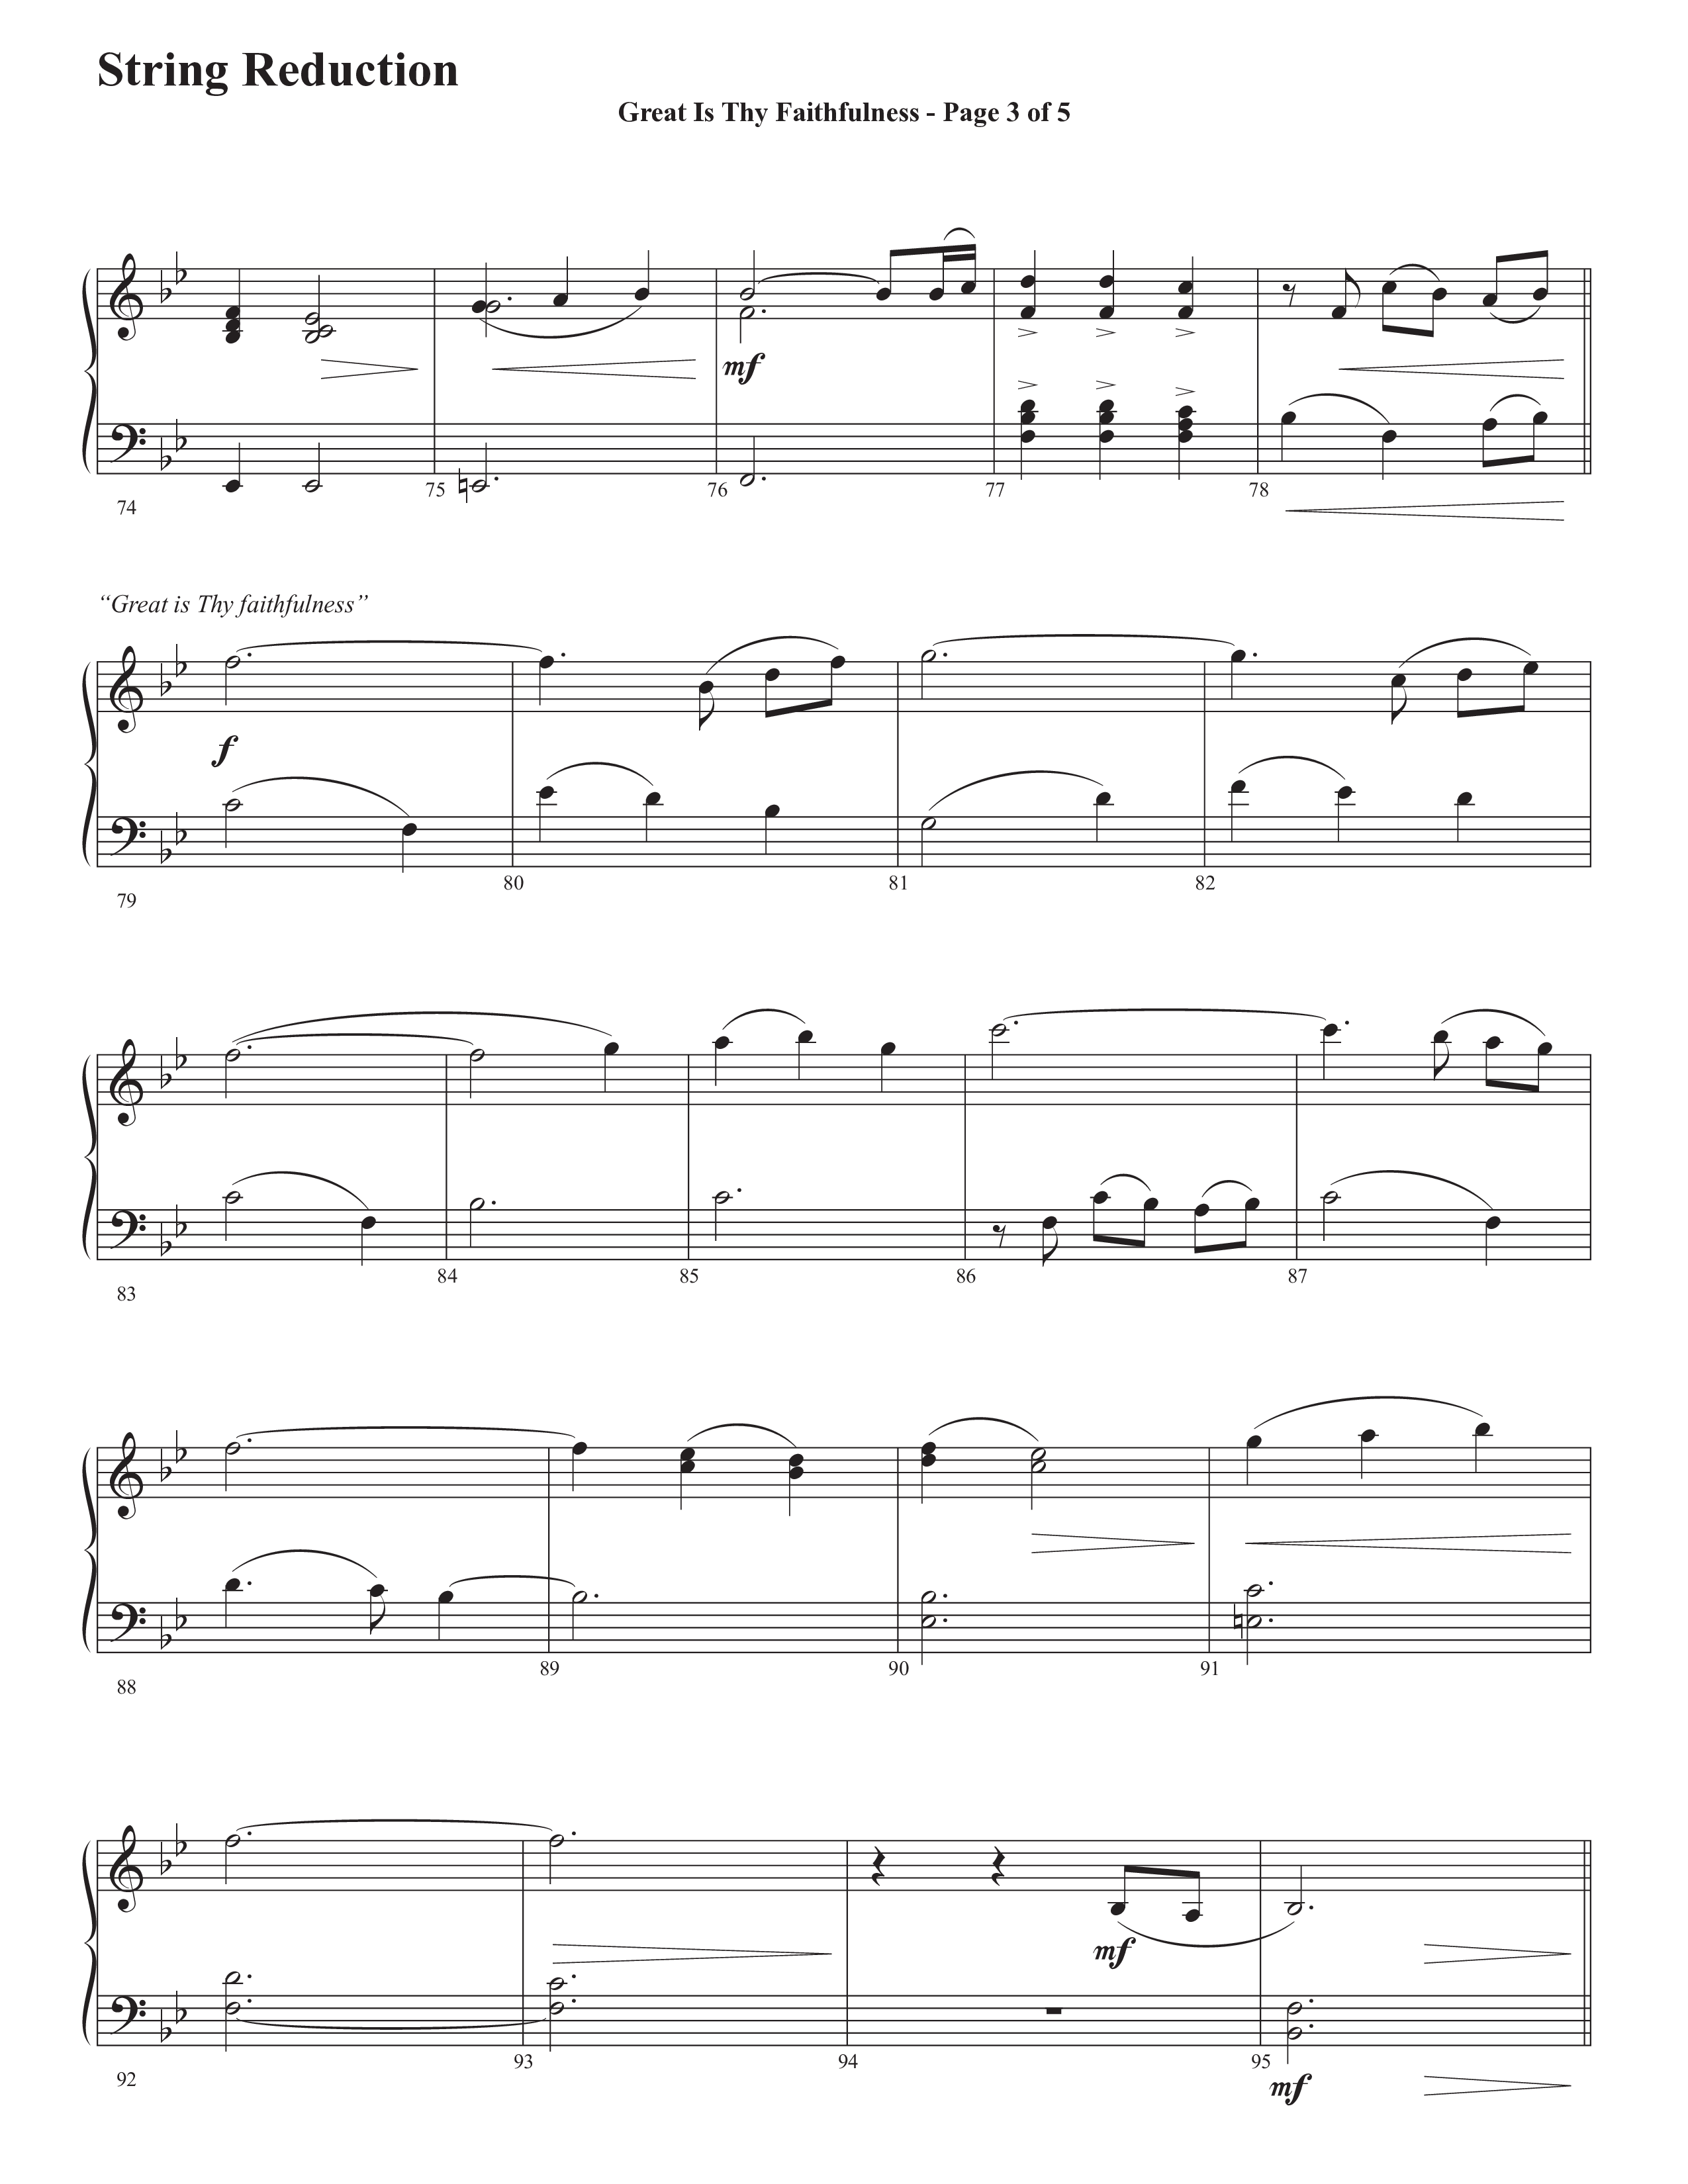 Great Is Thy Faithfulness (You Are Great) (Choral Anthem SATB) String Reduction (Semsen Music / Arr. John Bolin / Orch. David Shipps)